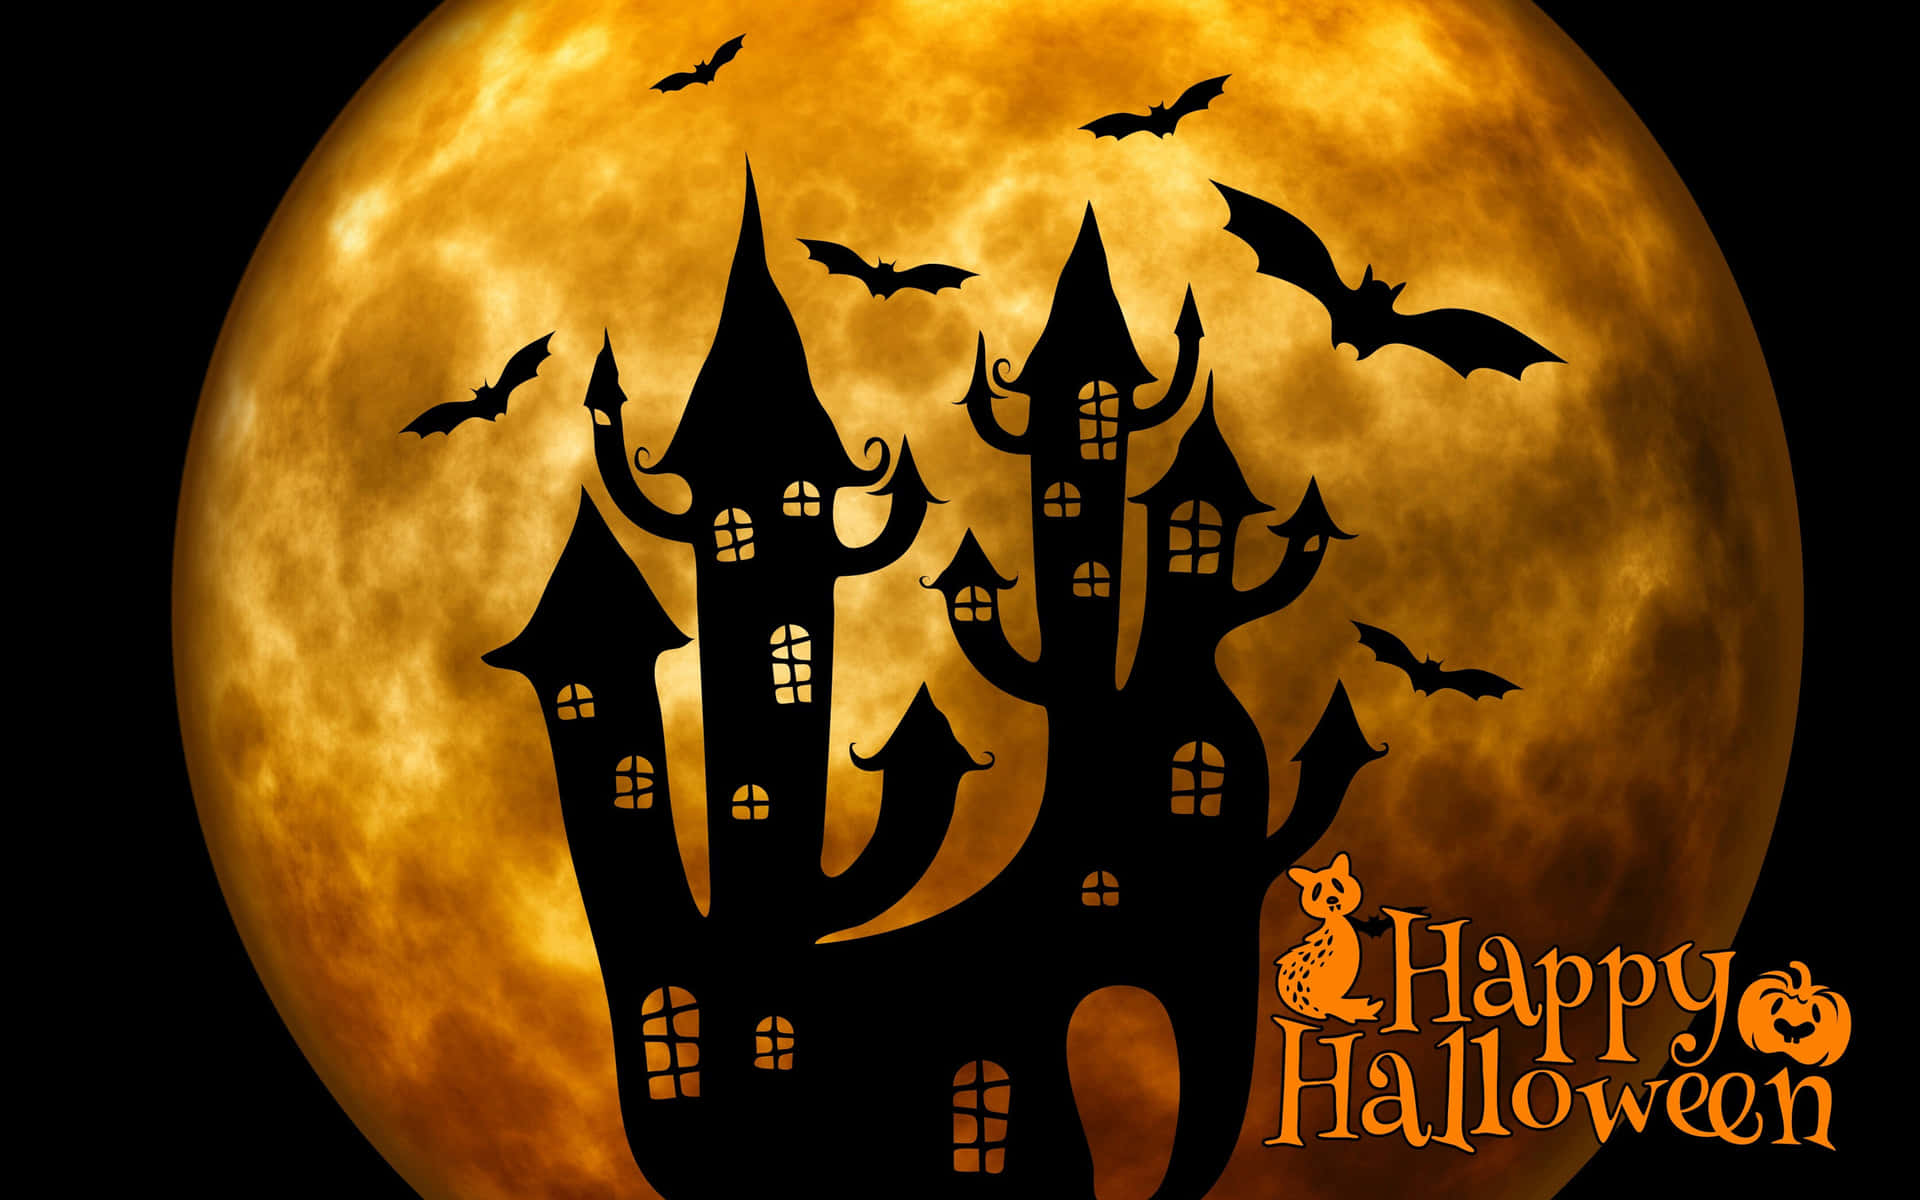 Trick or Treat! Make sure to have a Happy Halloween this year!